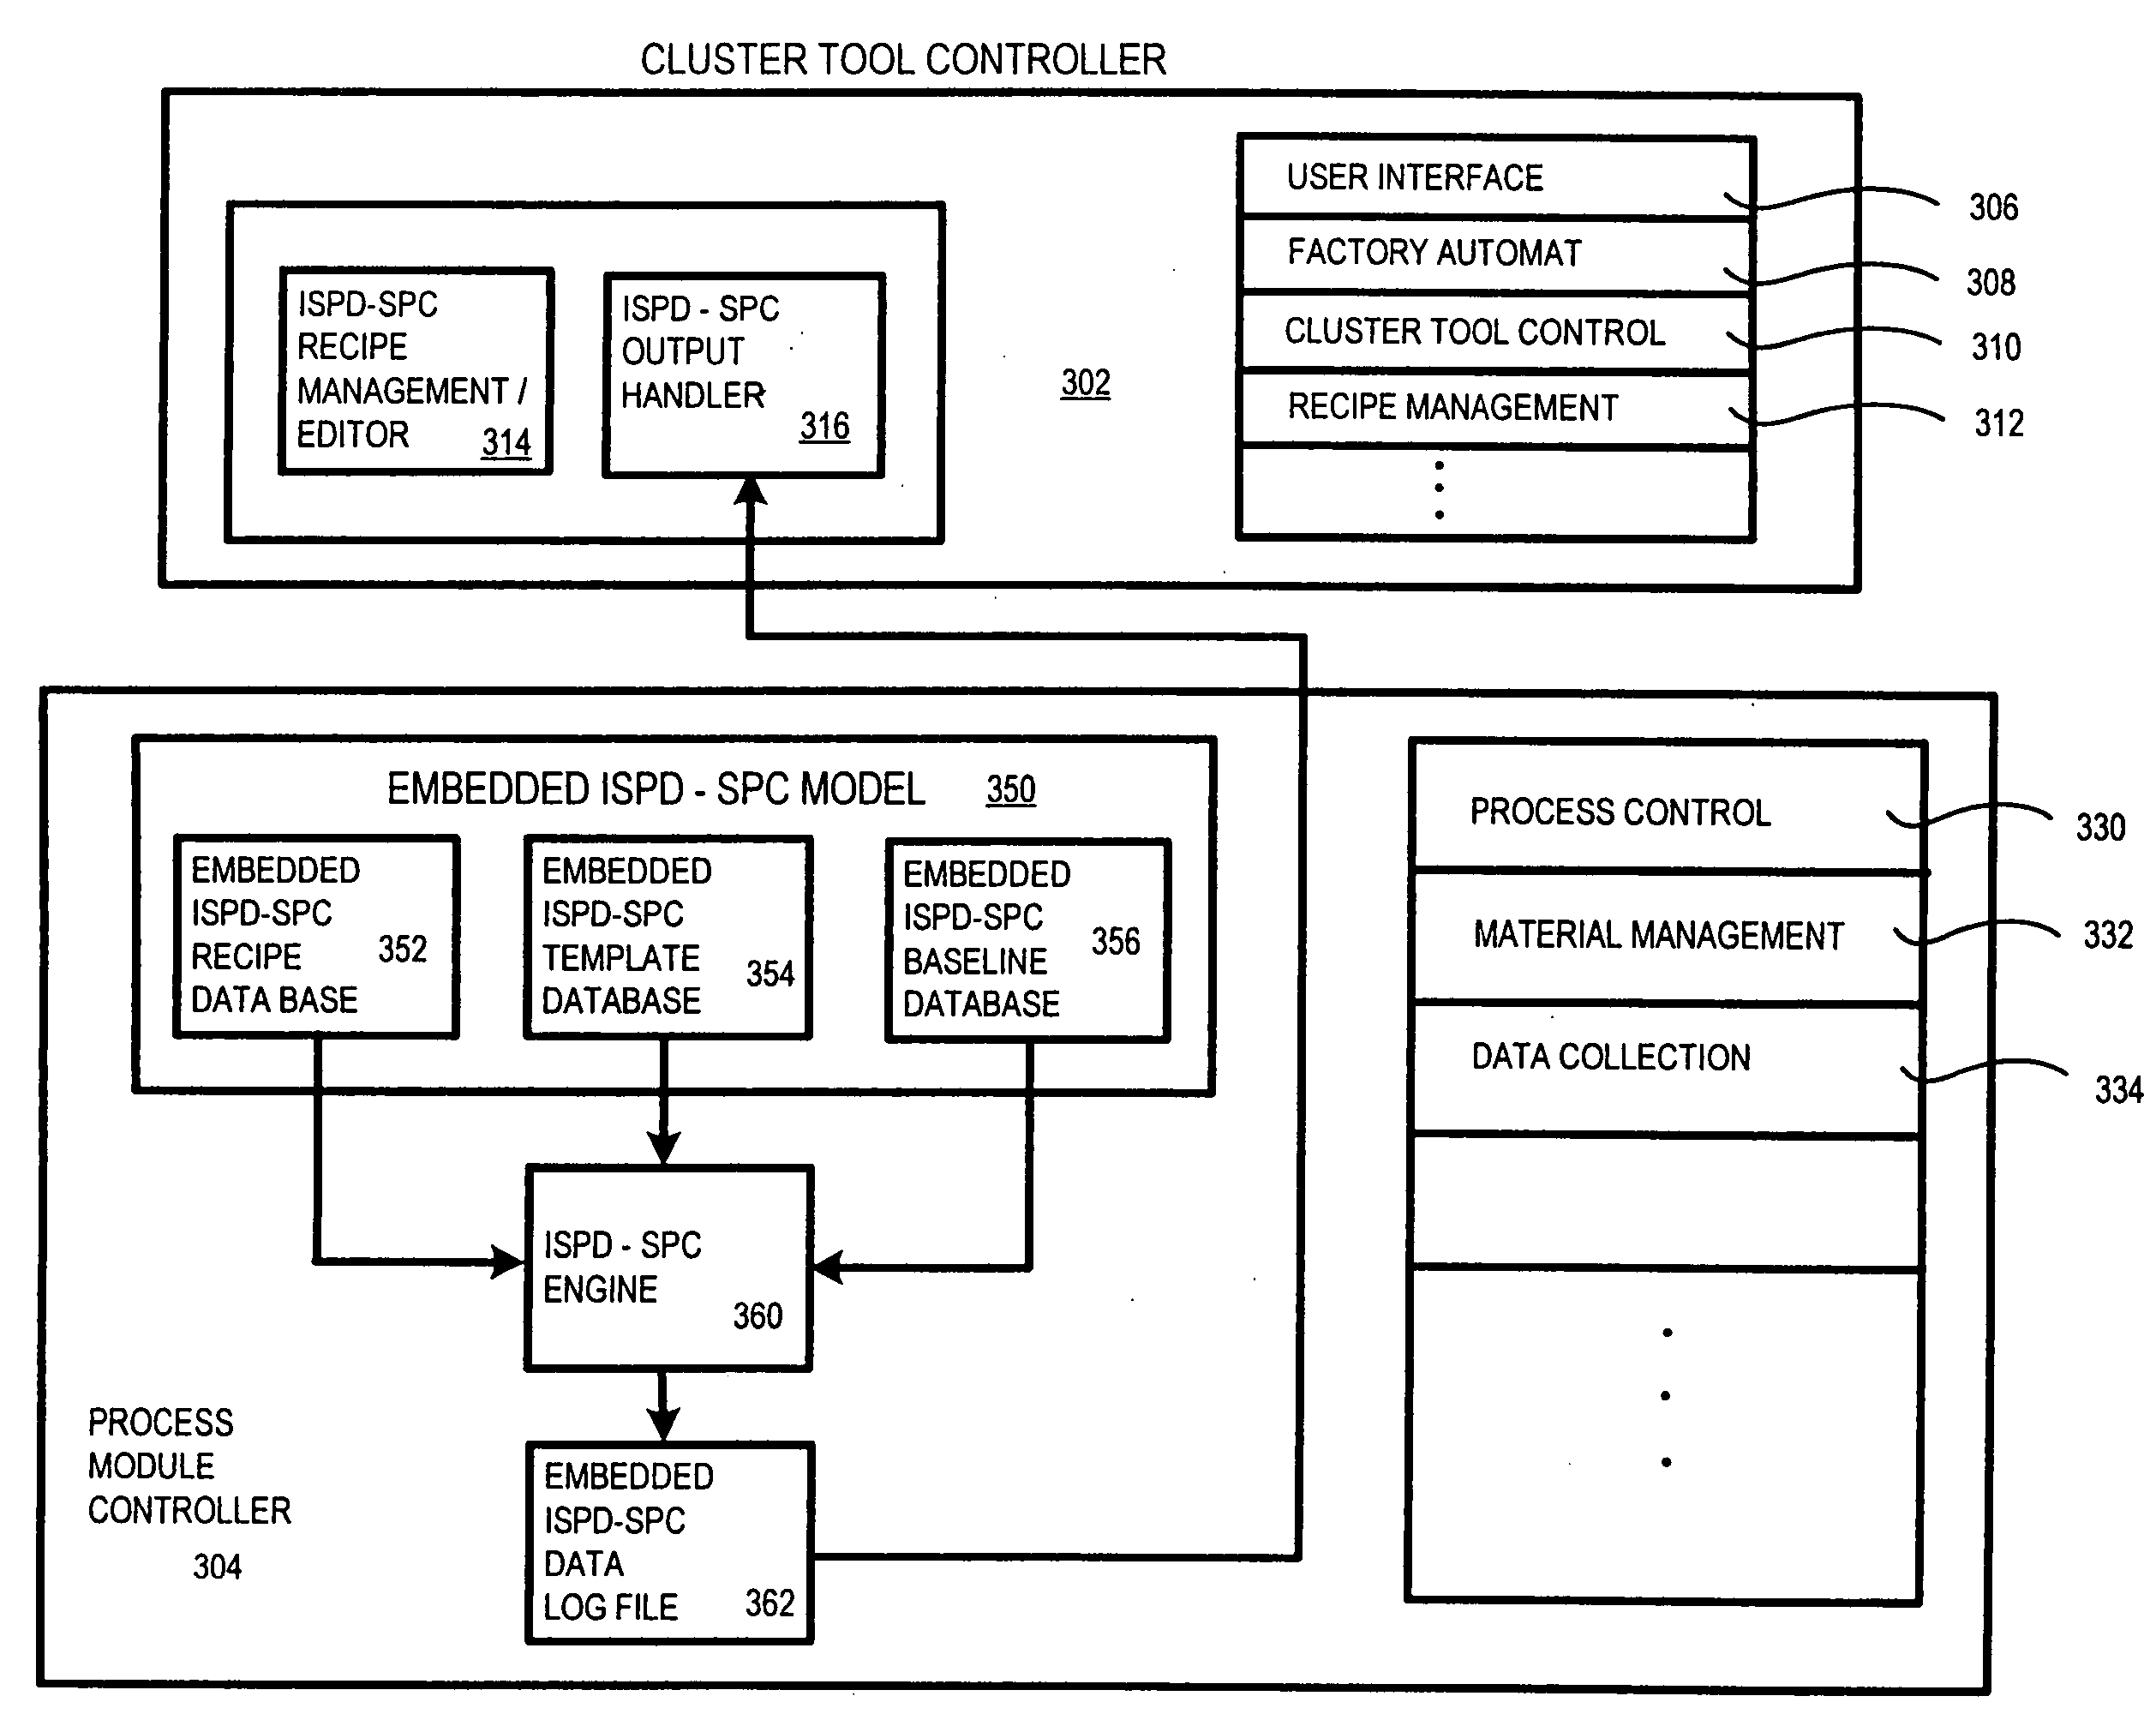 Integrated stepwise statistical process control in a plasma processing system